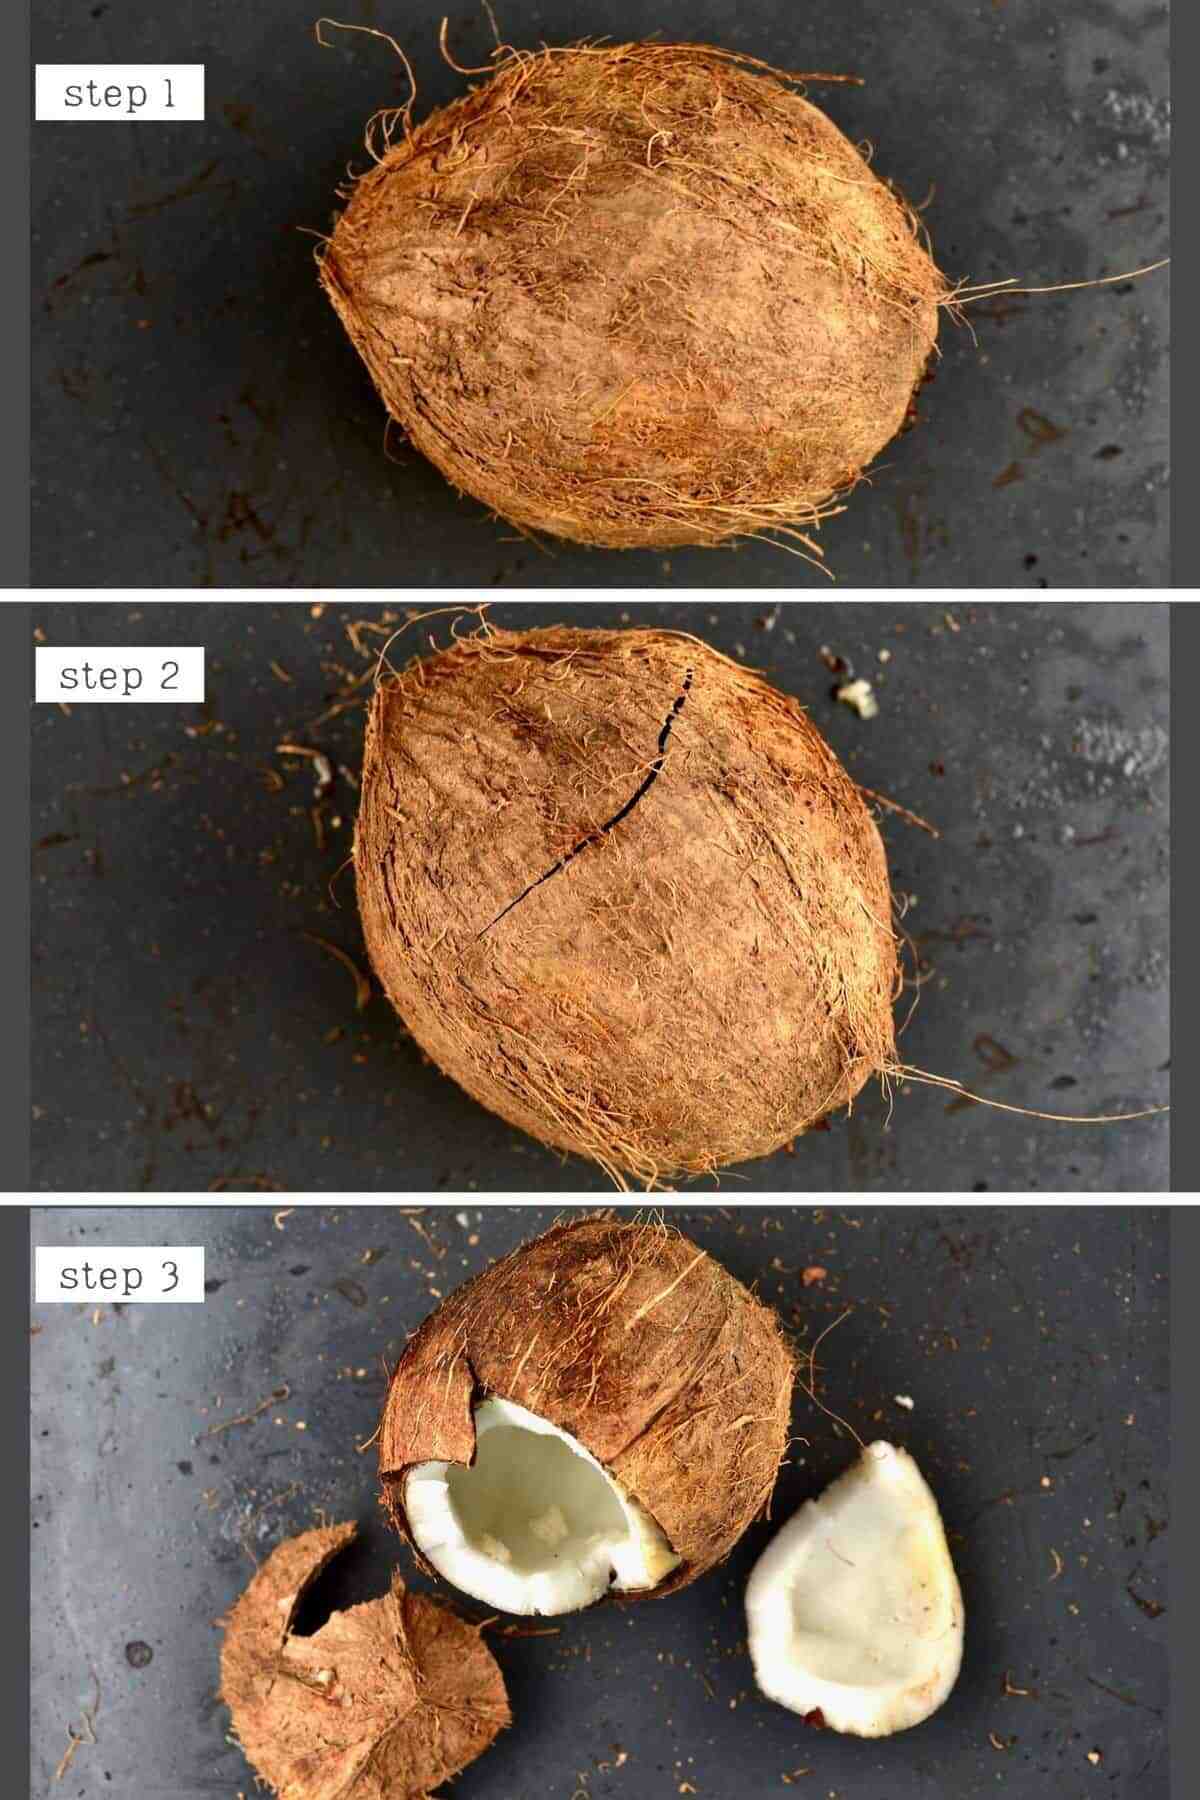 How do you open a coconut without spilling water?